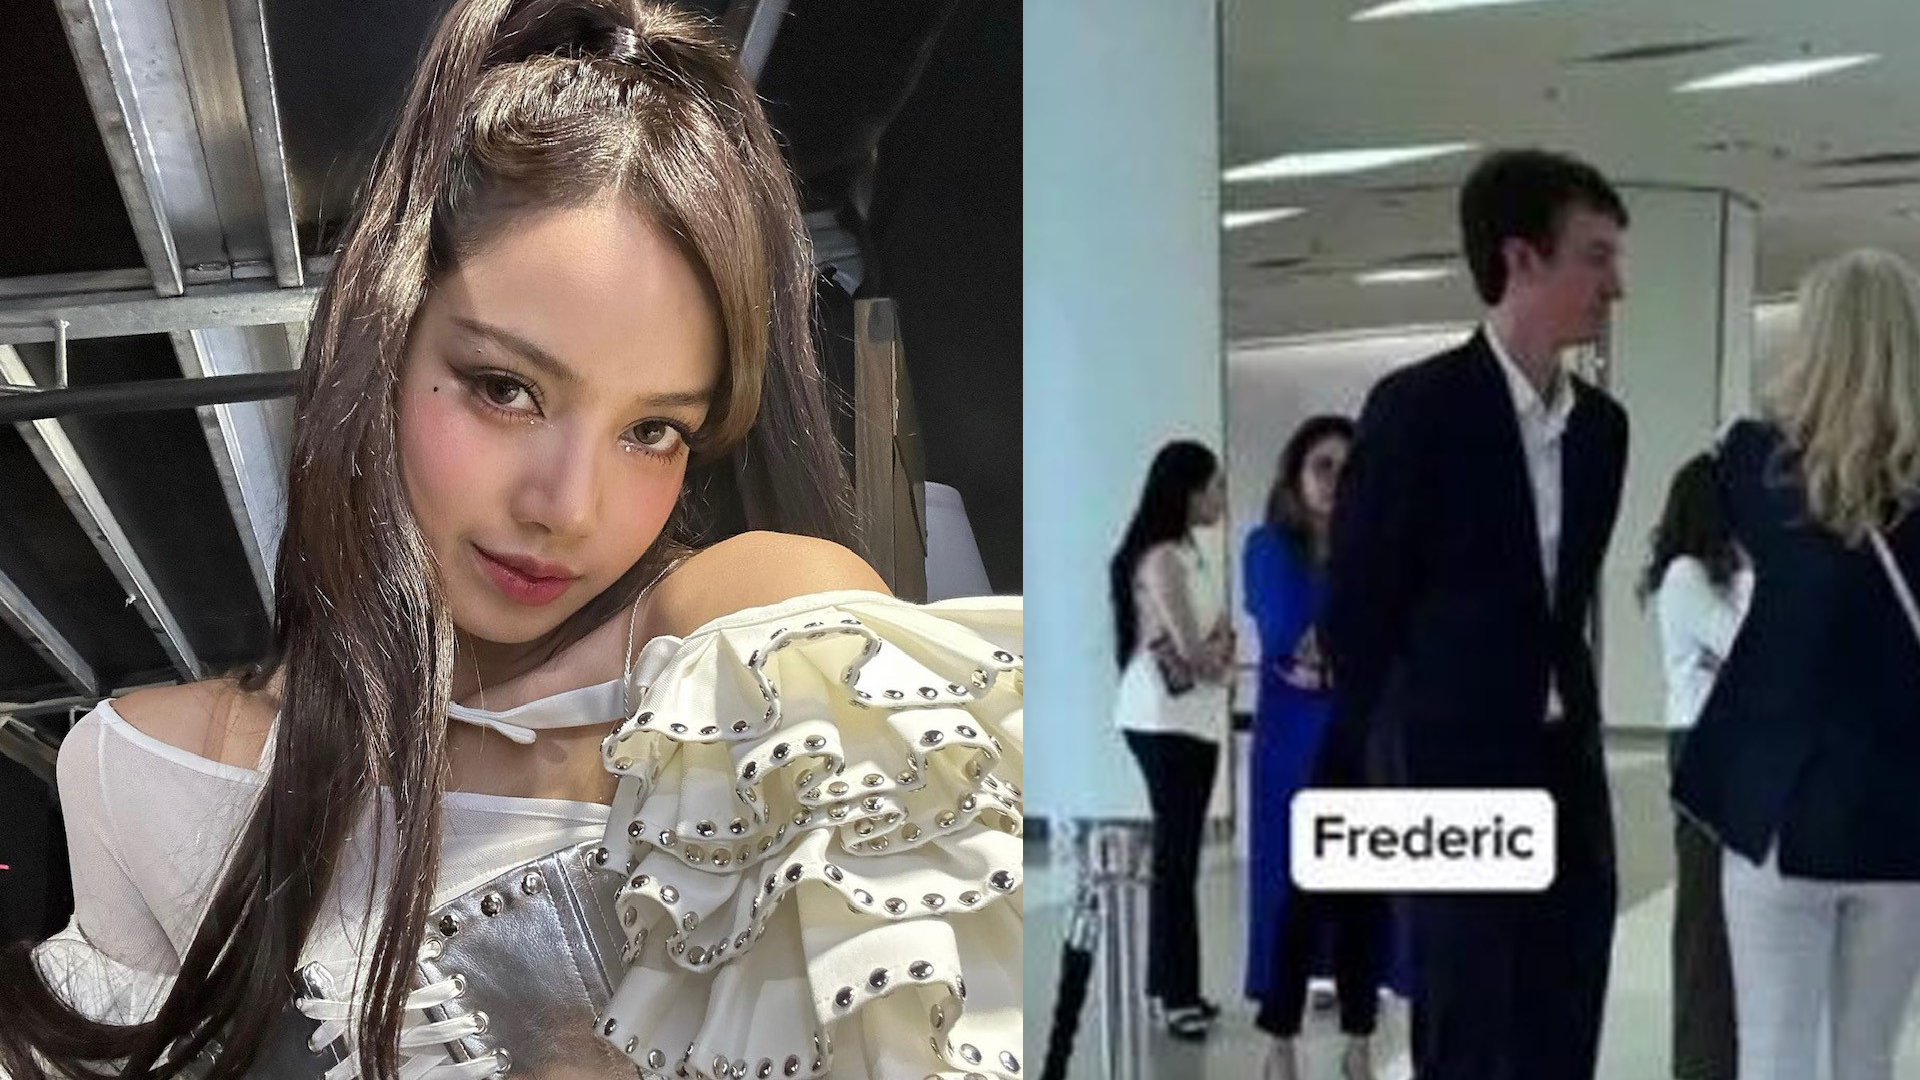 Blackpink's Lisa and Rumoured Boyfriend Tag Heuer CEO Frederic Arnault In  Thailand At The Same Time, Fuelling Further Speculation Of Romance - 8days